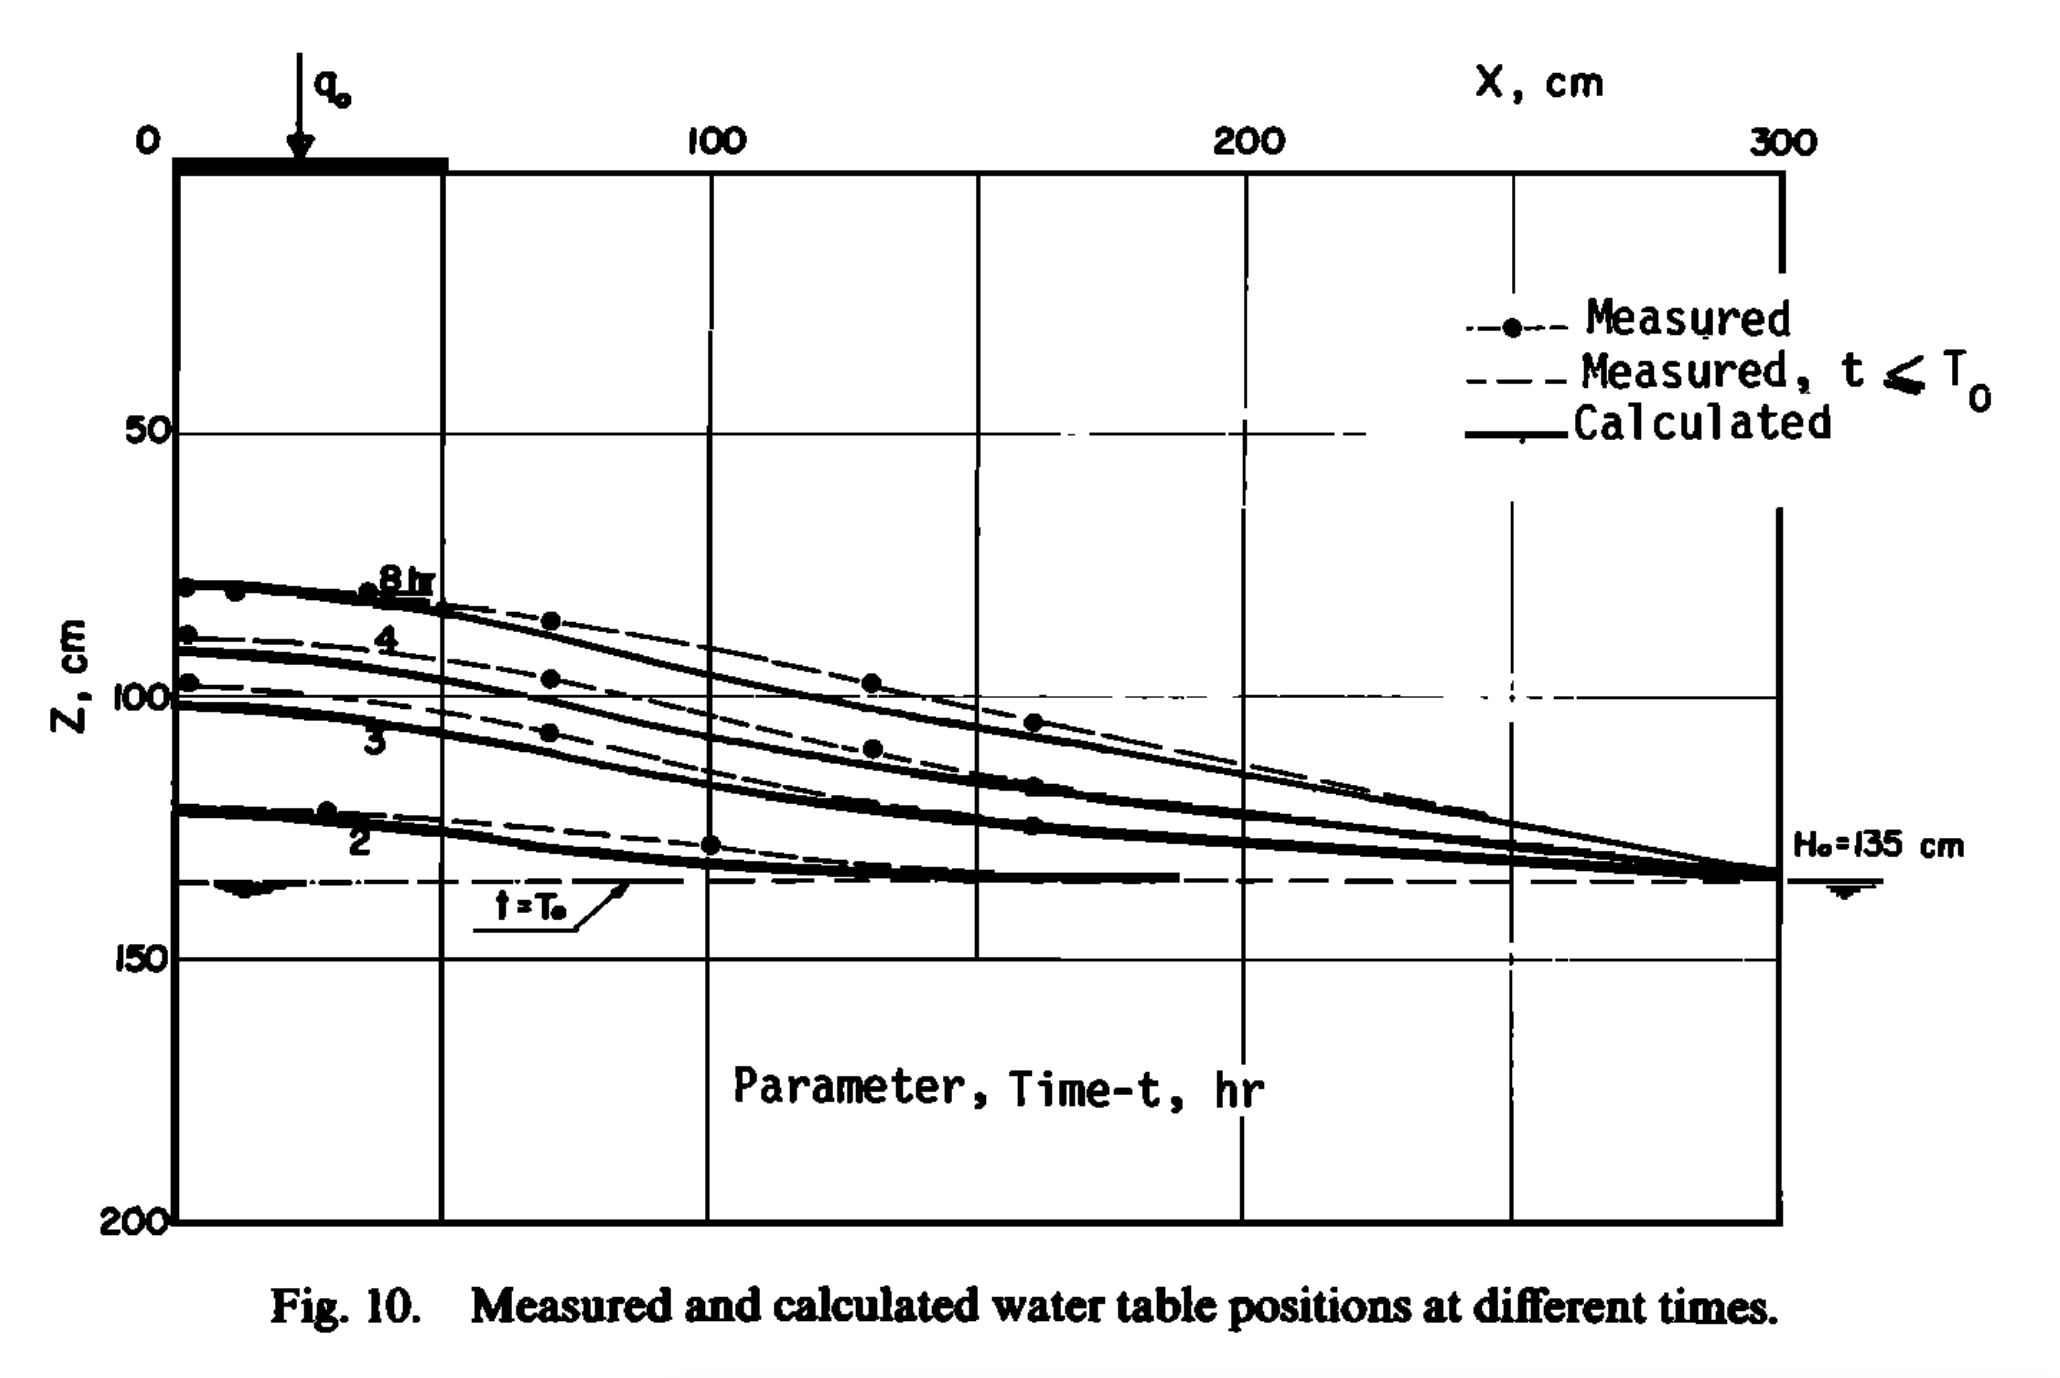 Groundwater measurement and 2-D numeric simulation in Vauclin (1979)